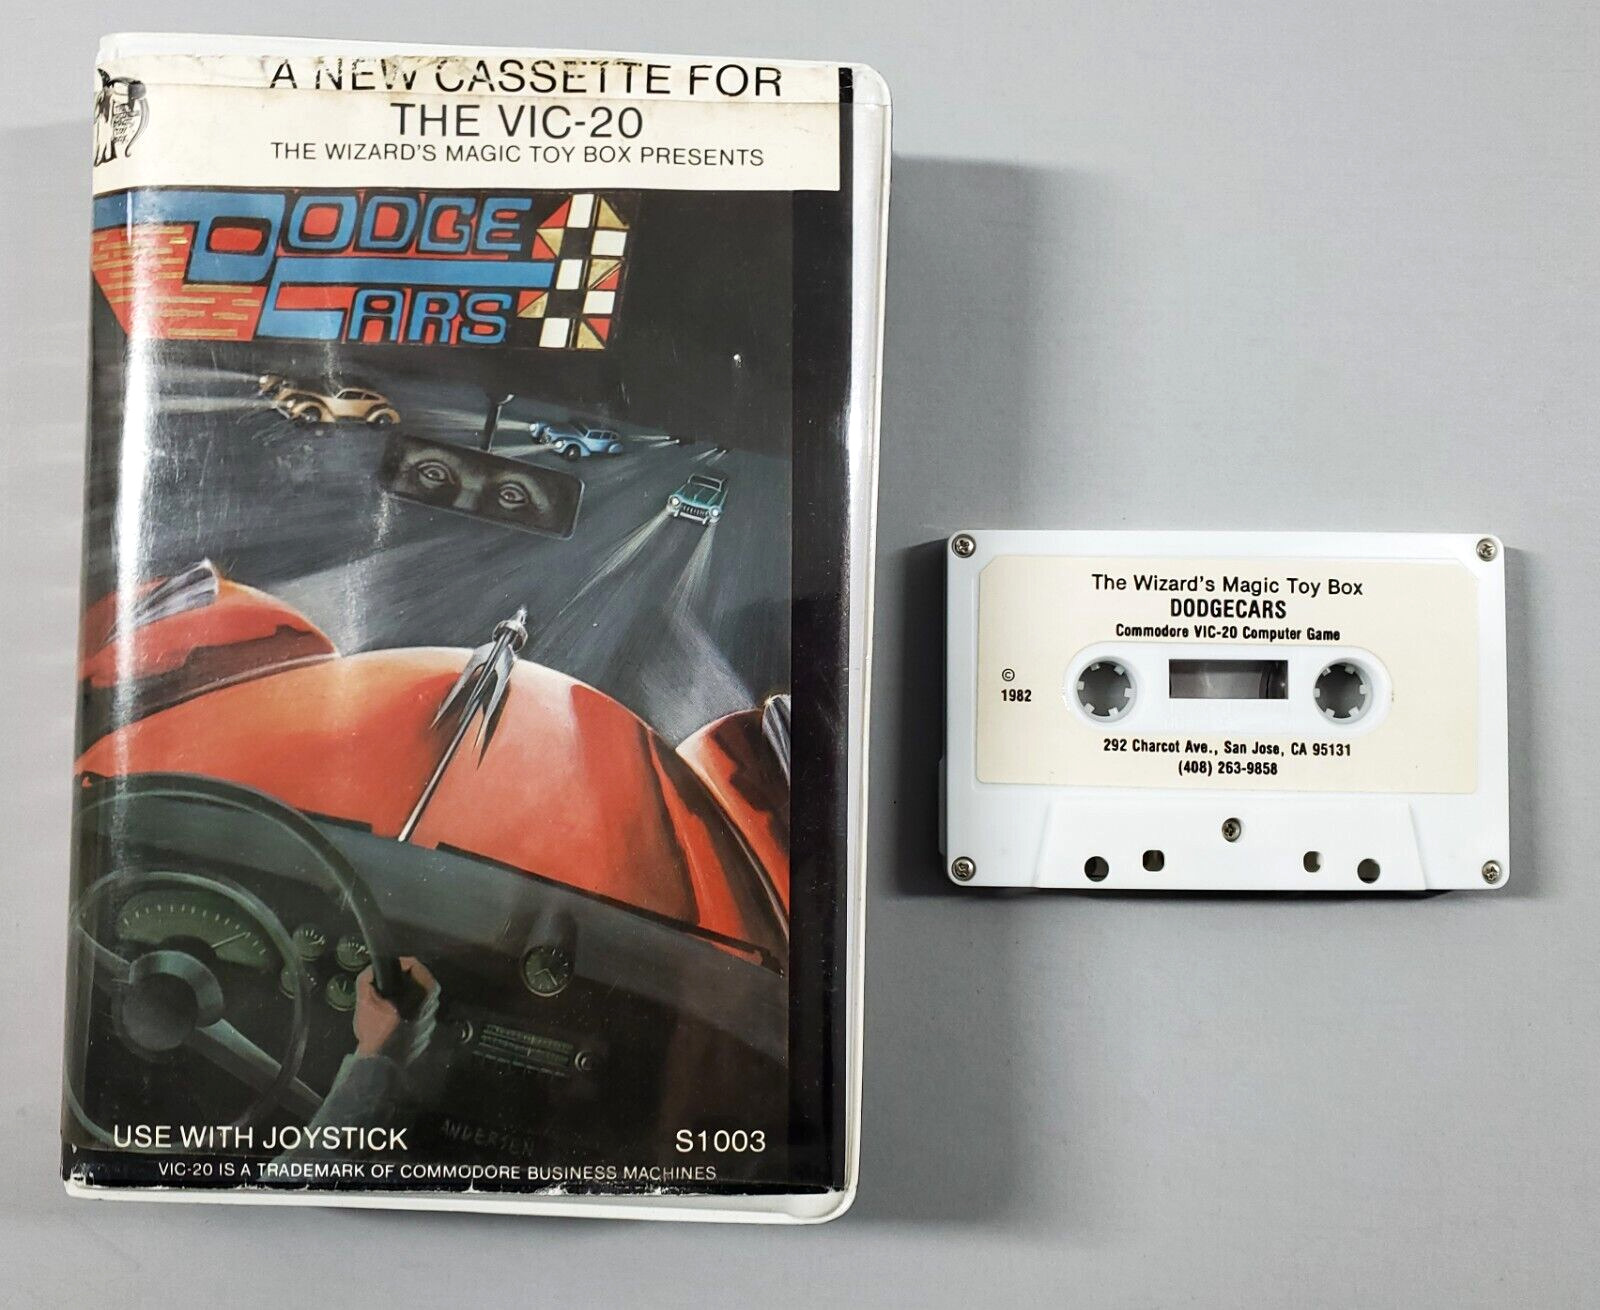 Dodge Cars 1982 Cassette Game Commodore VIC-20 Wizards Magic Toy Box Vintage